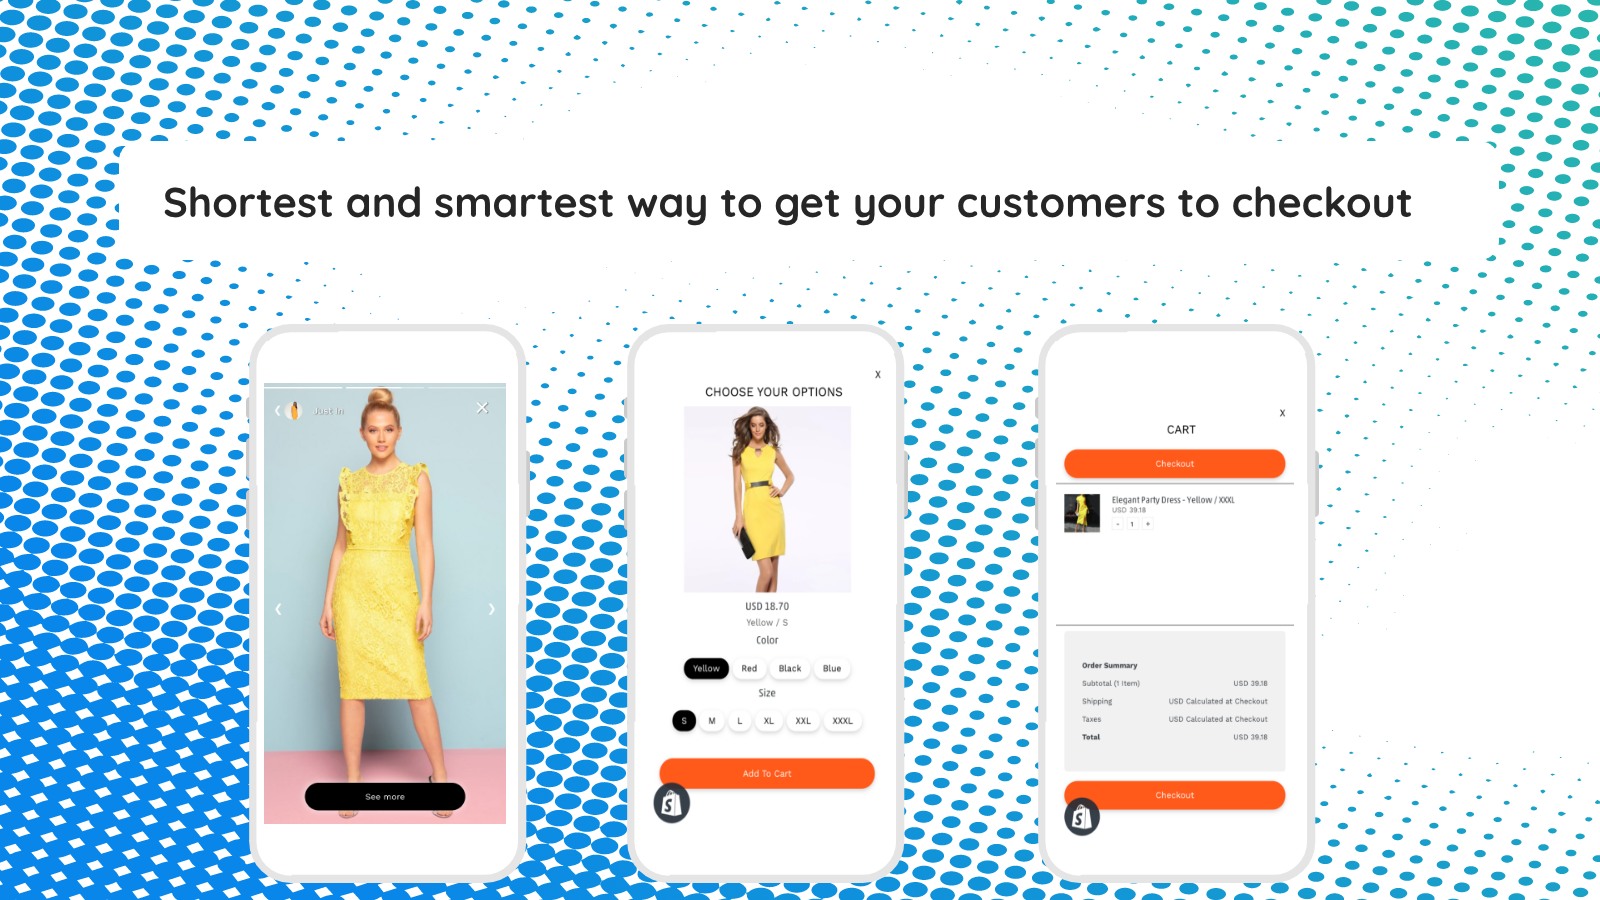 Shortest and smartest way to get your customers to checkout